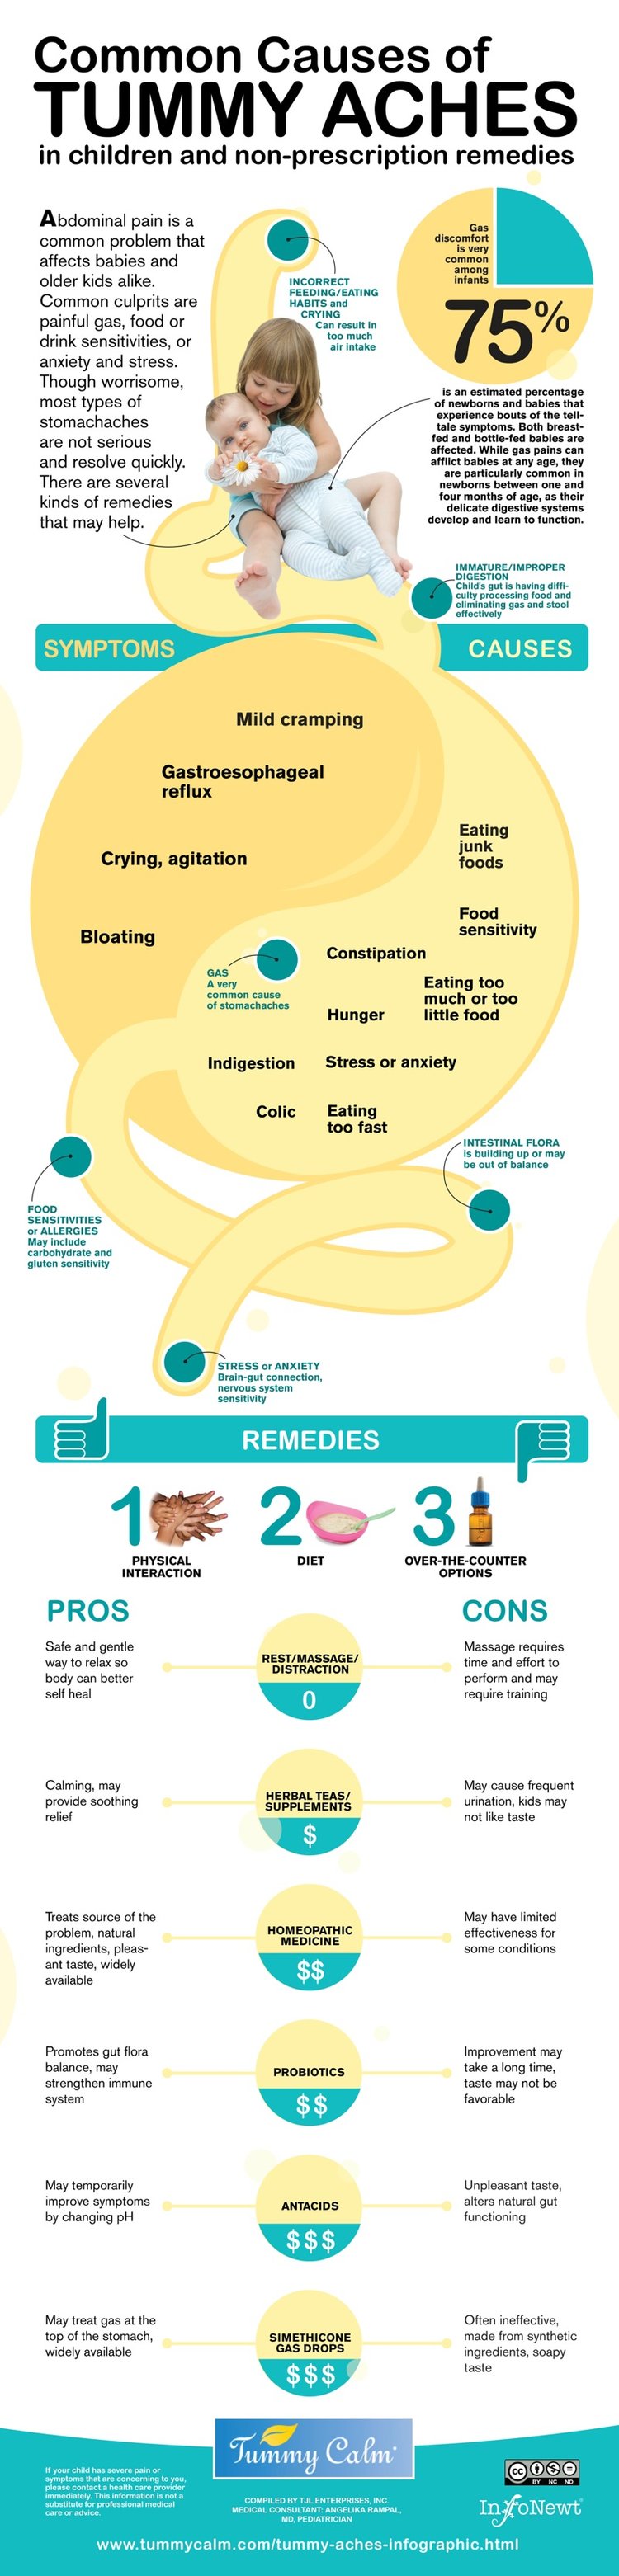 Common Causes of Tummy Aches in Children — Cool Infographics